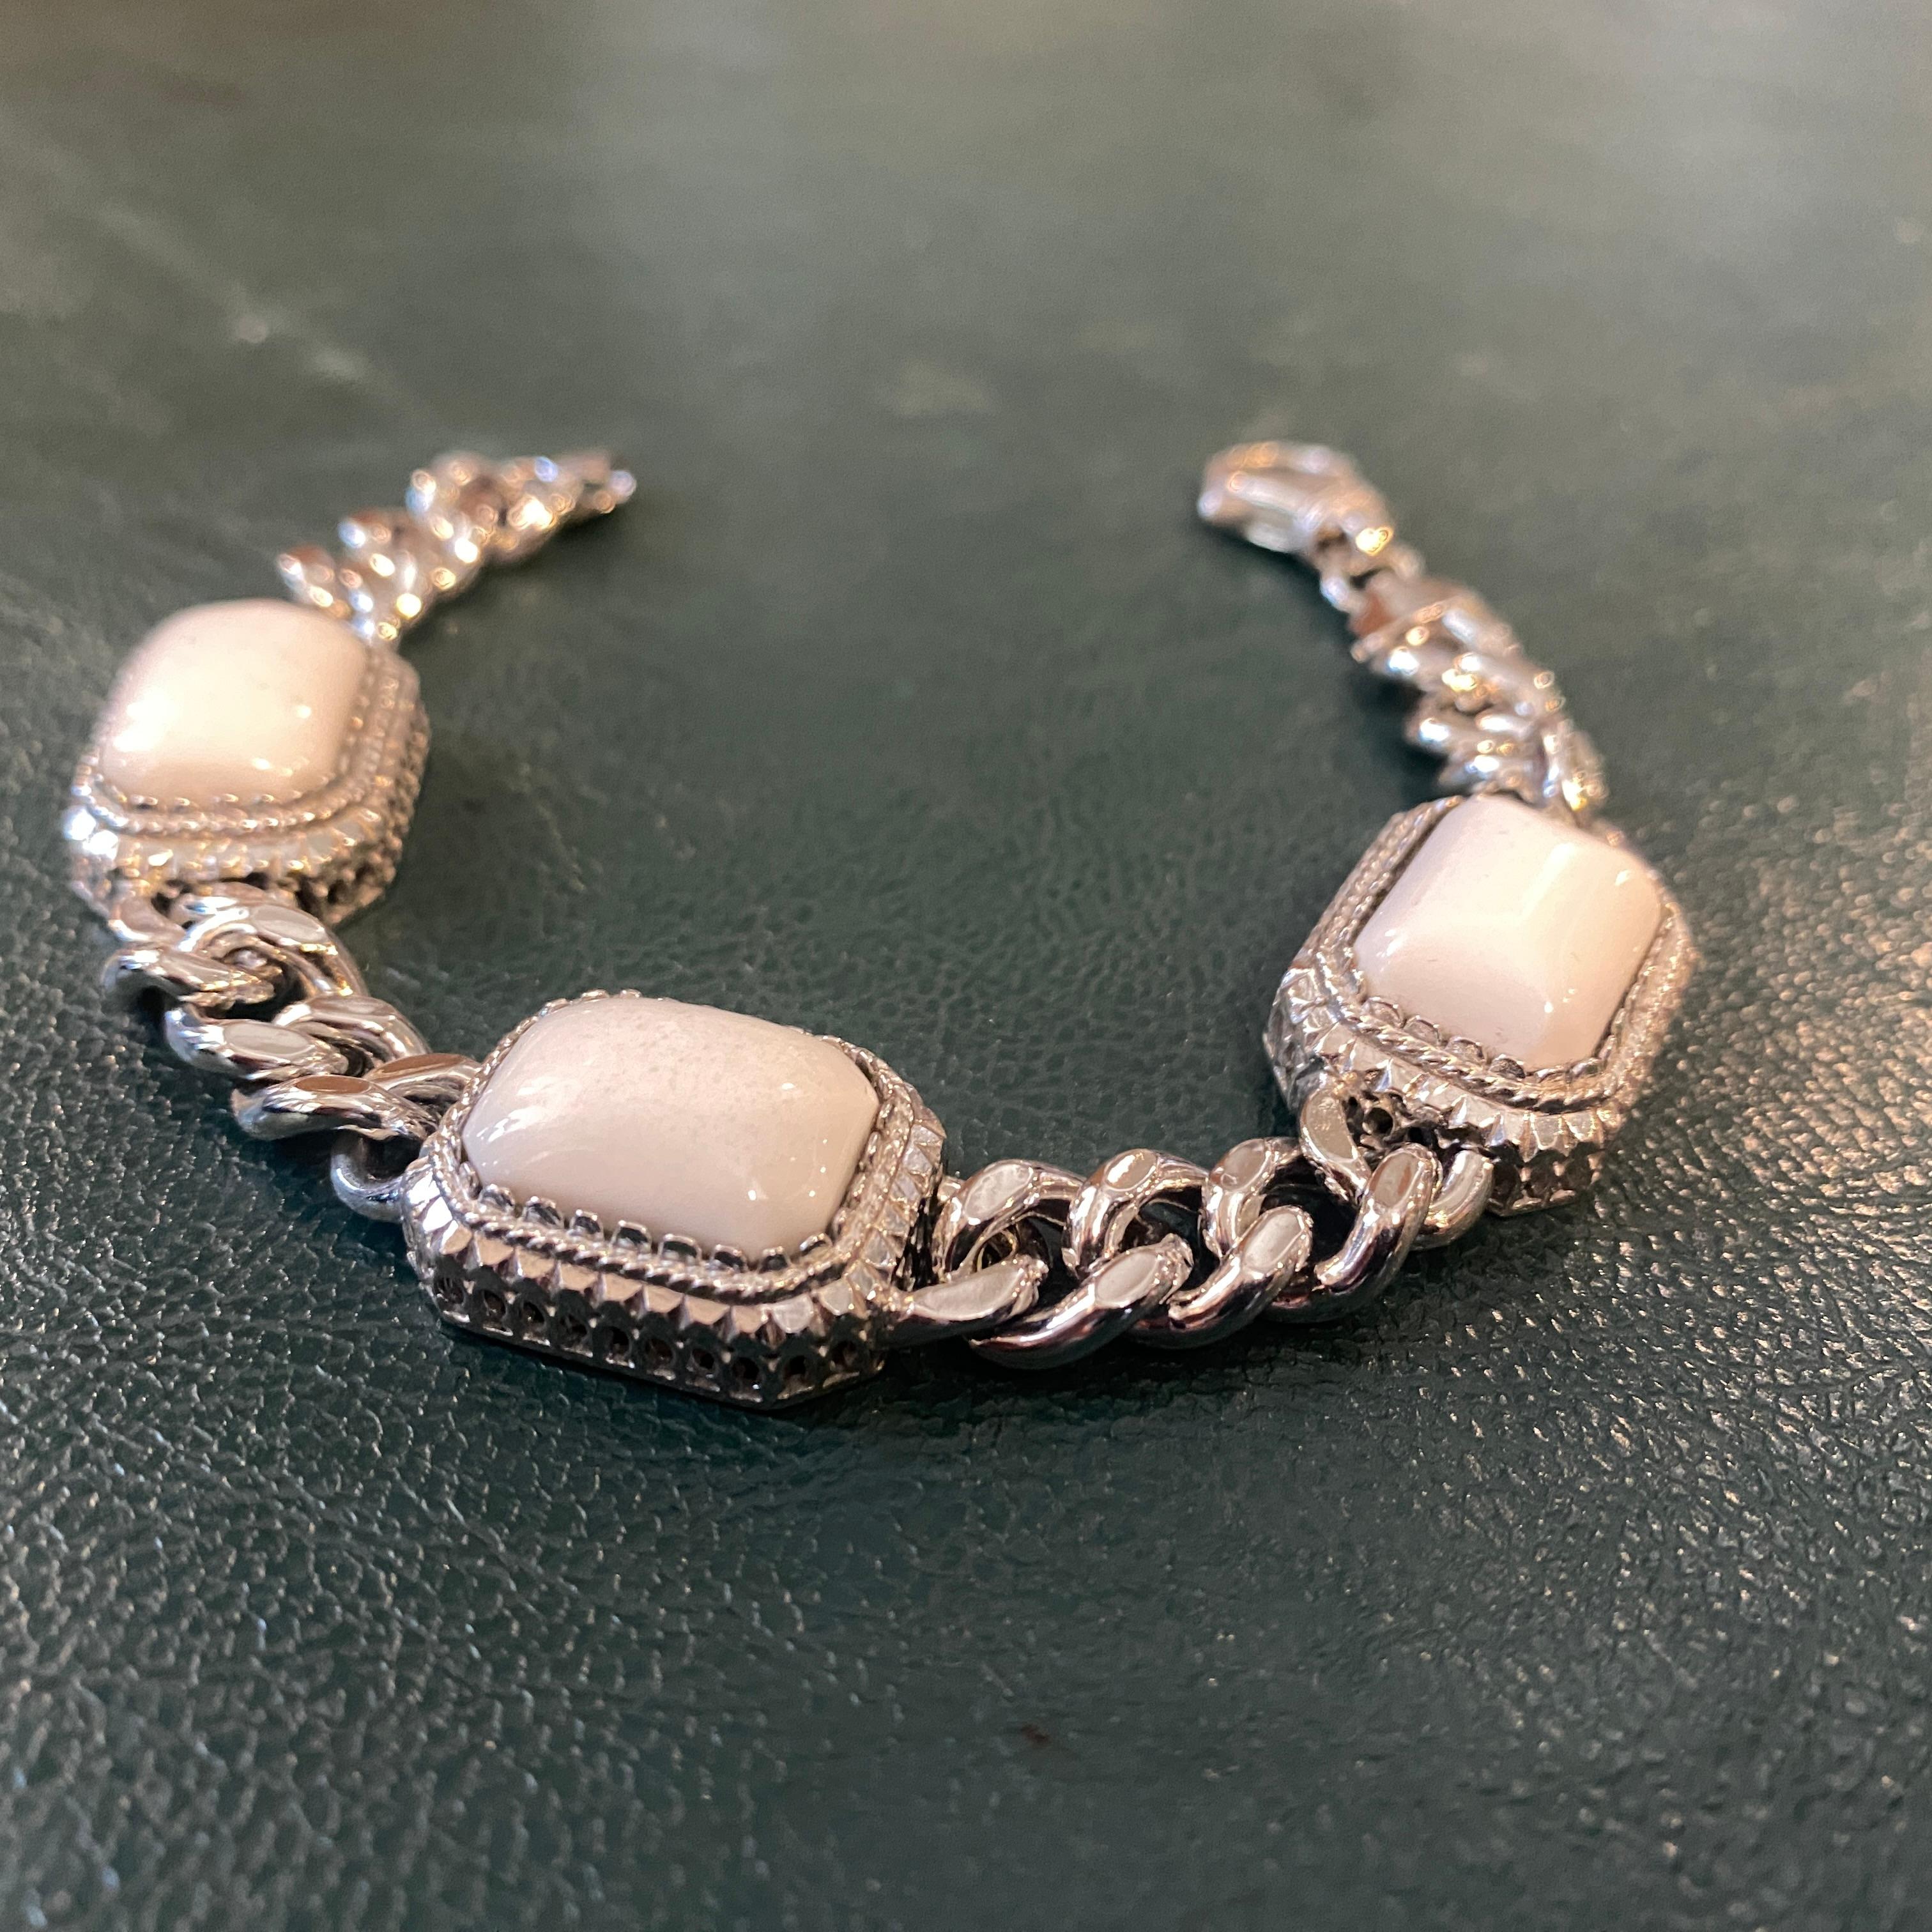 Neoclassical 1990s Sterling Silver and White Agate Italian Bracelet by Anomis For Sale